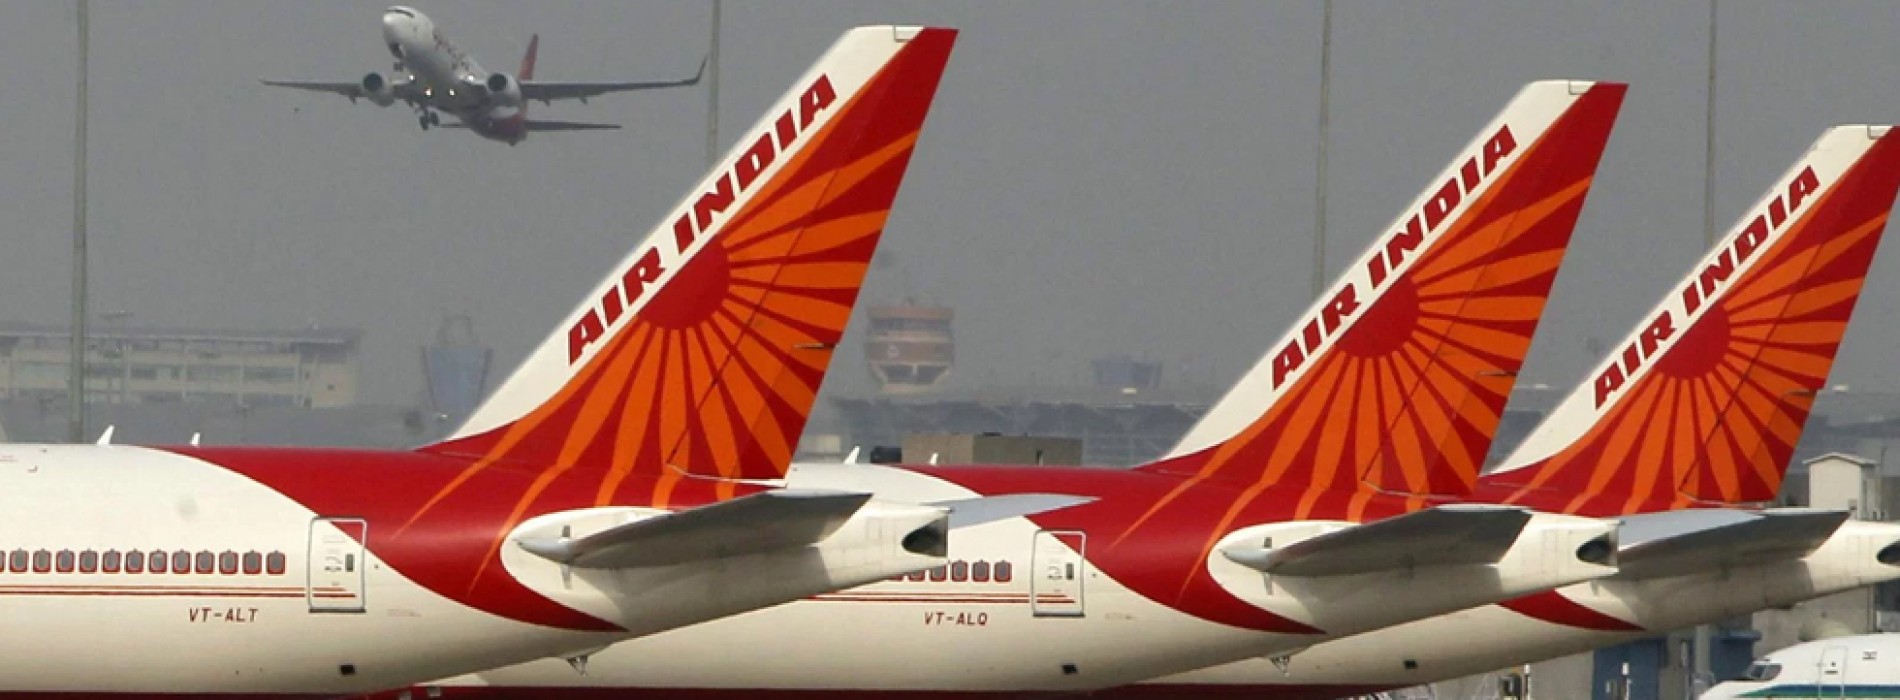 Still waiting to see if IndiGo bids for Air India: Govt